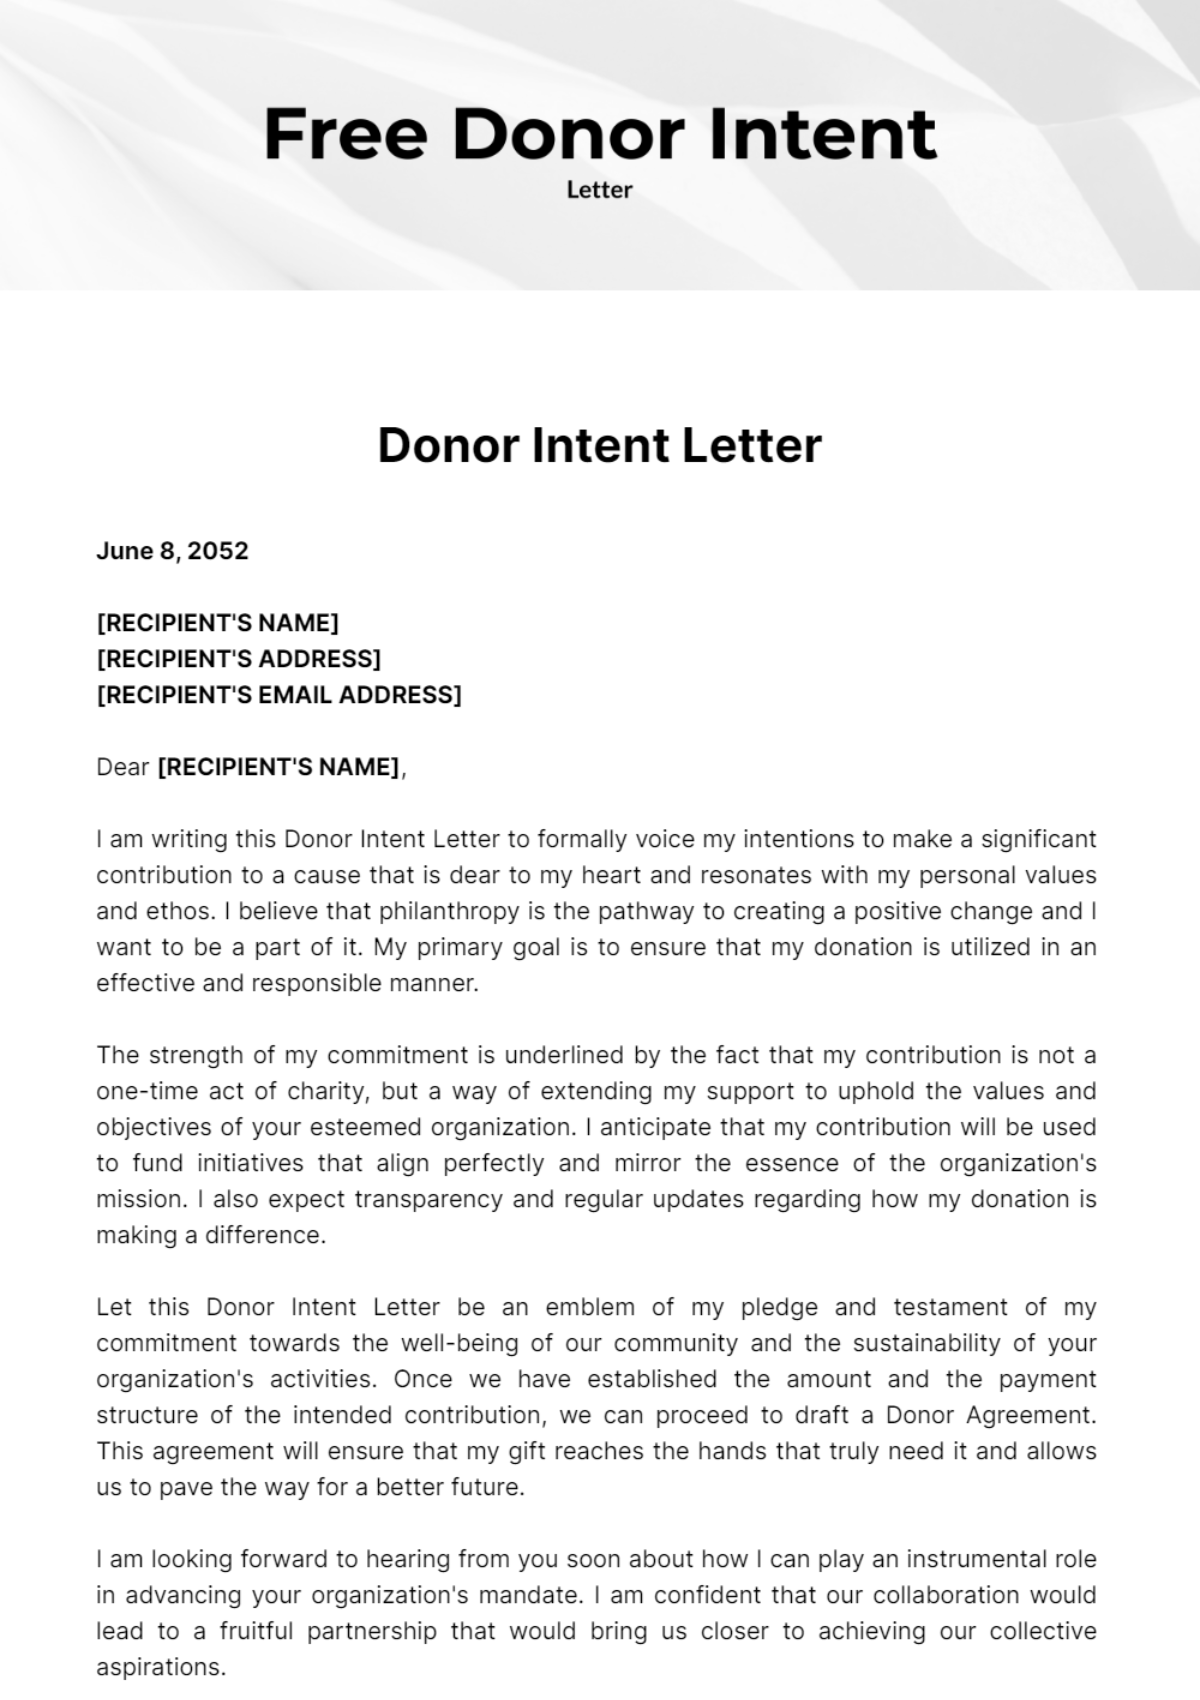 Free Donor Intent Letter Template